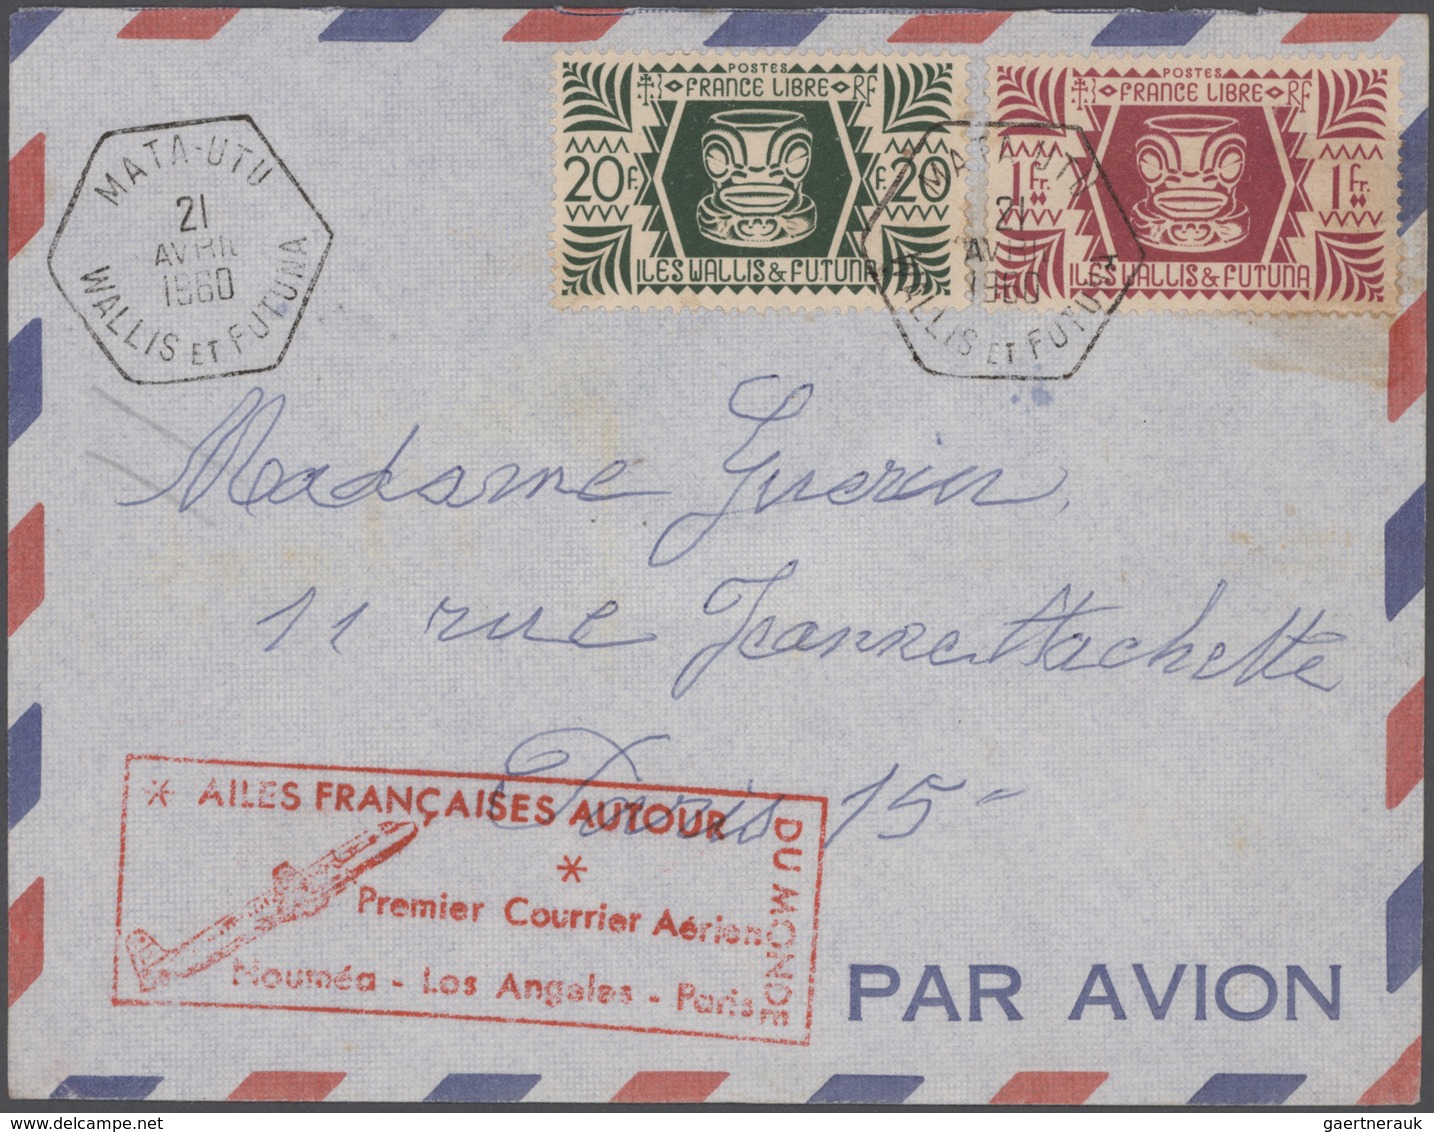 Frankreich: 1860/2000, holding of several hundred (and probably more than 1000) covers/cards/station